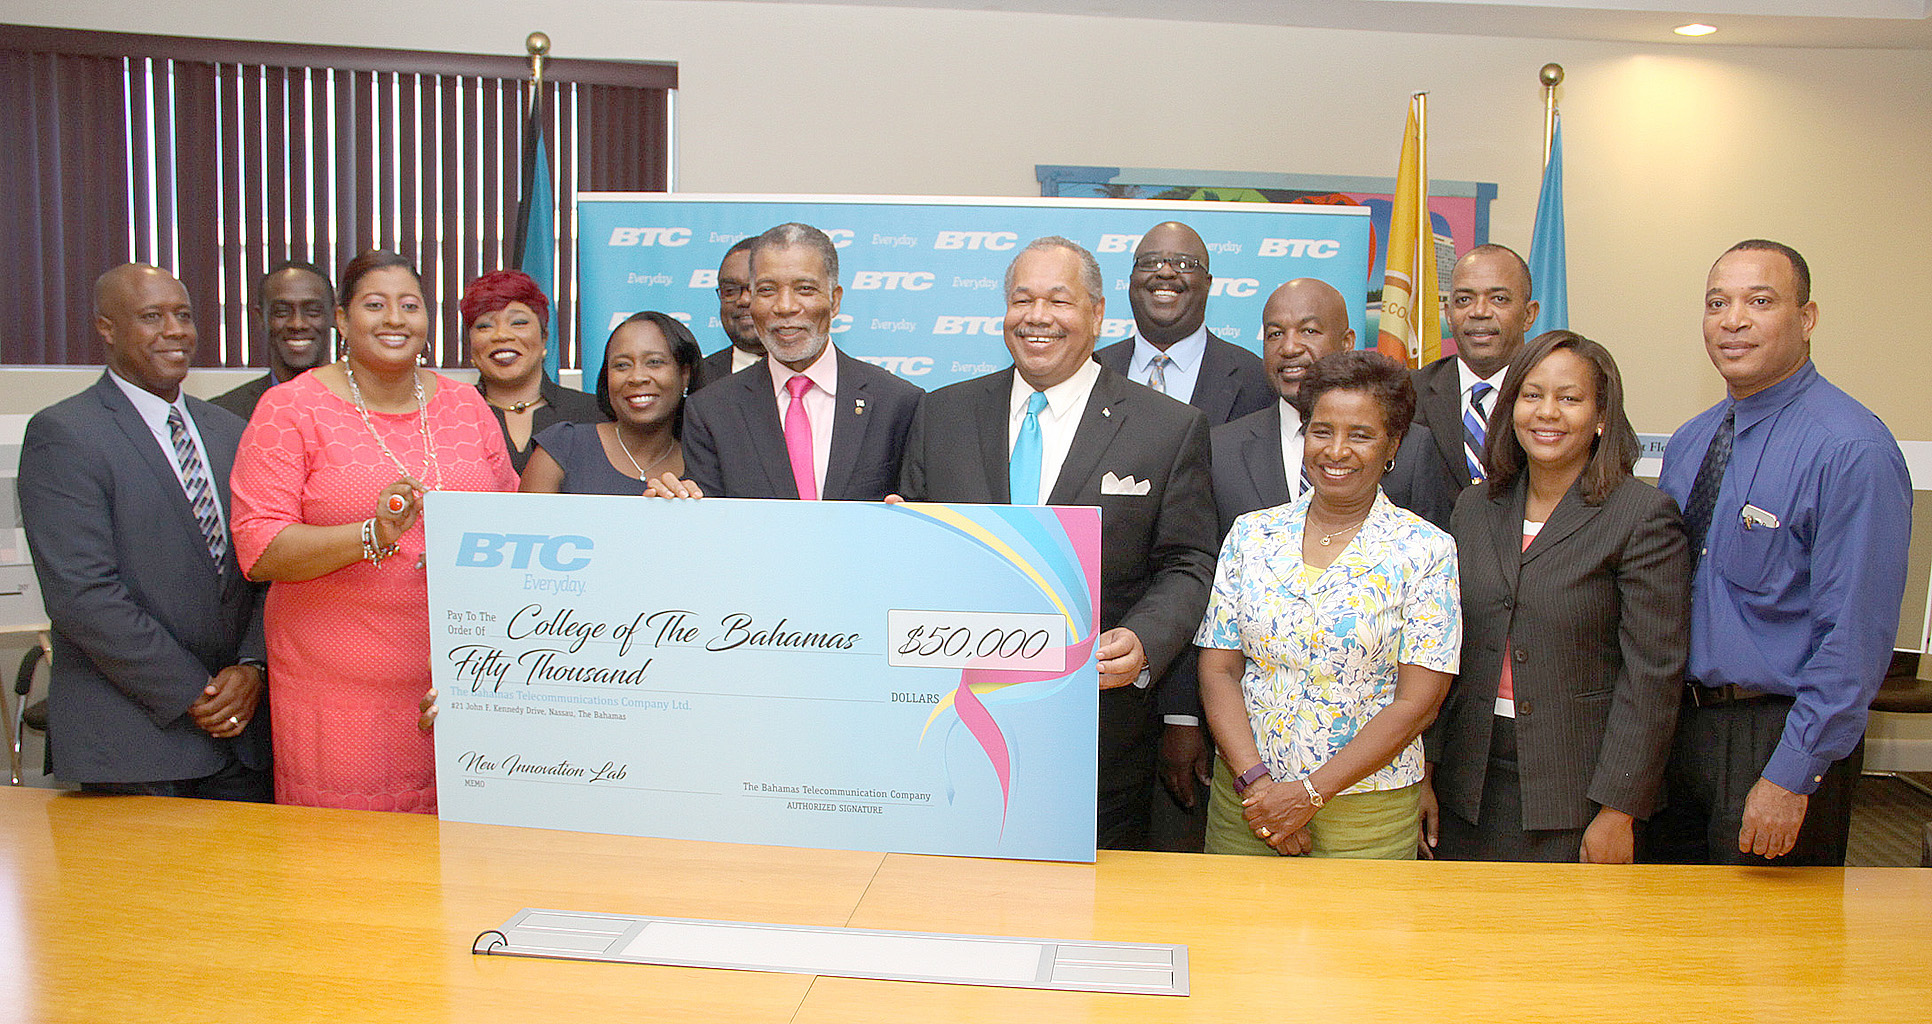  CEO of Bahamas Telecommunications Company Ltd. (BTC) Leon Williams (left) and College of The Bahamas (COB) President Dr. Rodney Smith share handshake following the signing of a Memorandum of Understanding at the College of The Bahamas on July 14, 2016.  They are flanked by representatives of BTC and COB.